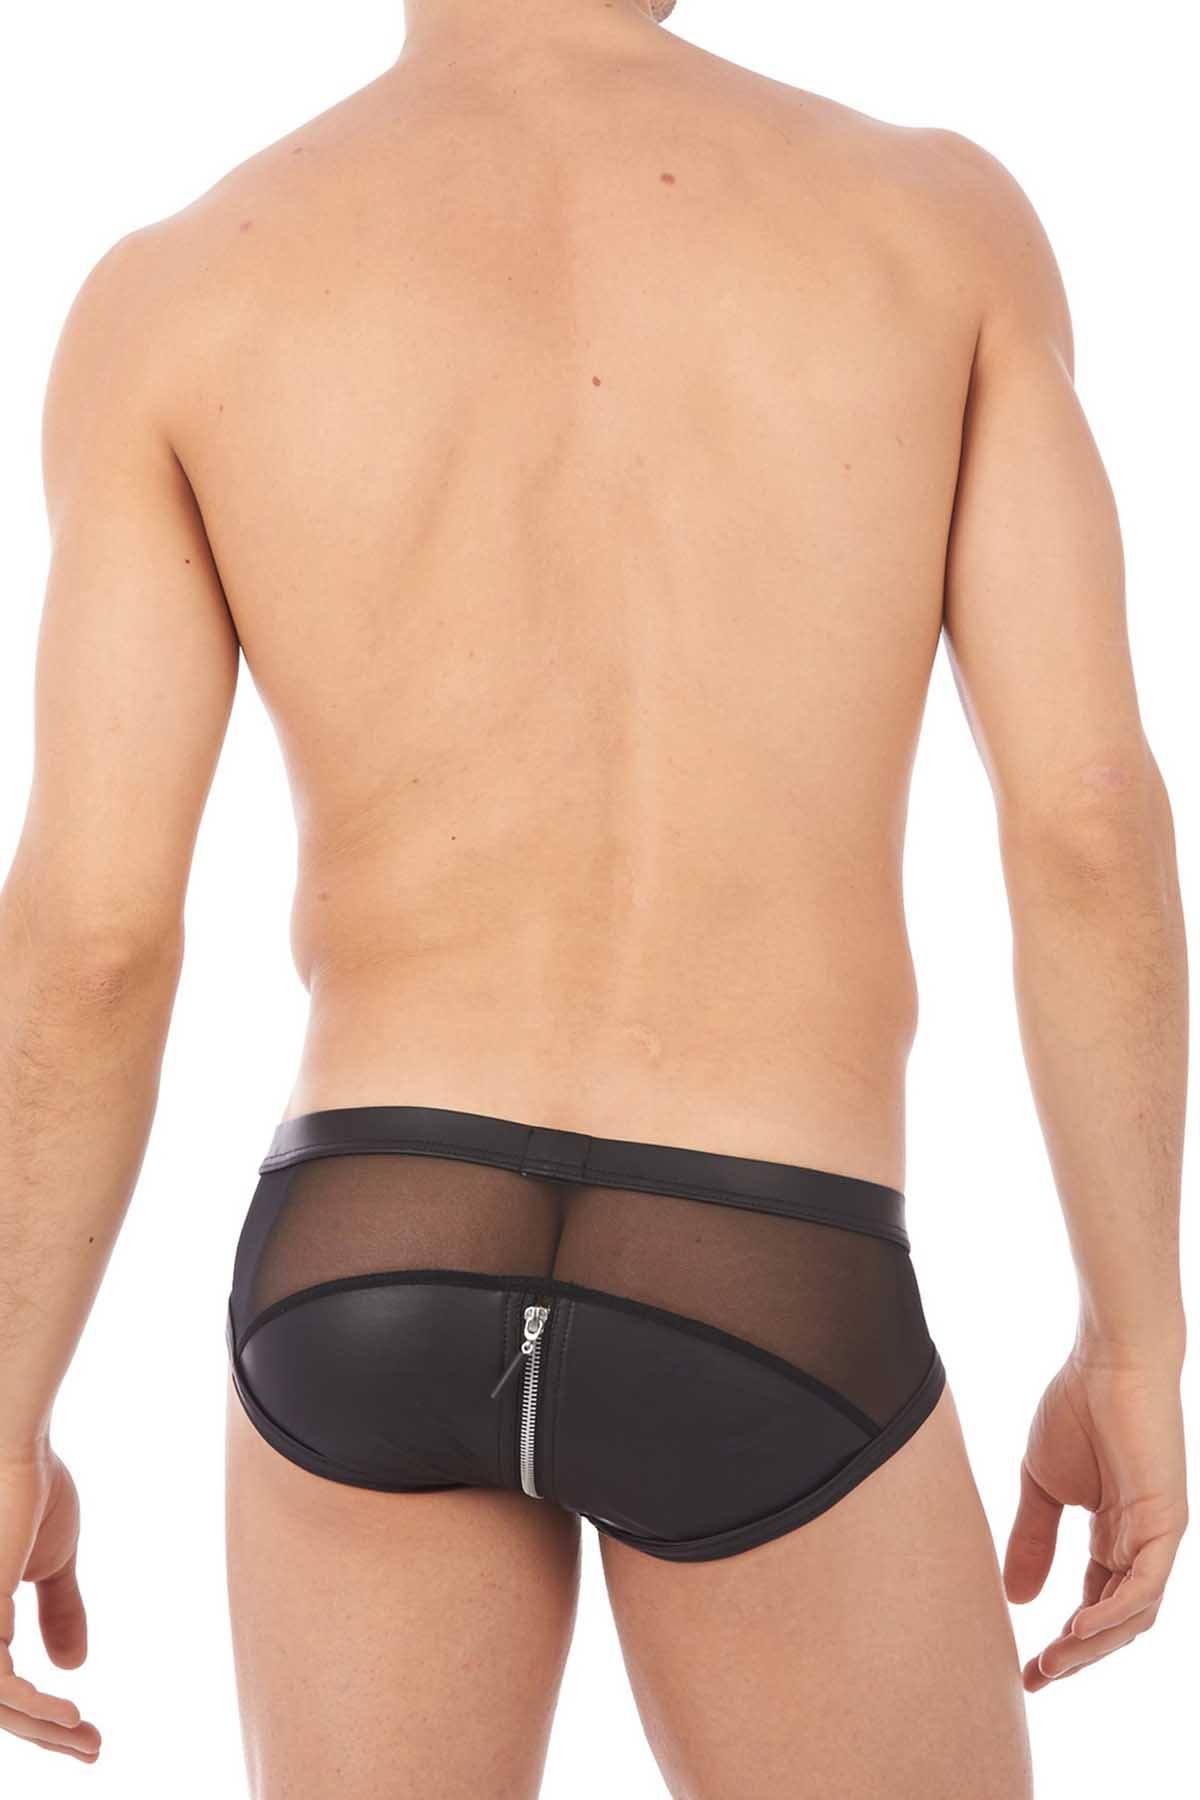 Gregg Homme Black Leather-Look Reckless Zipper Brief